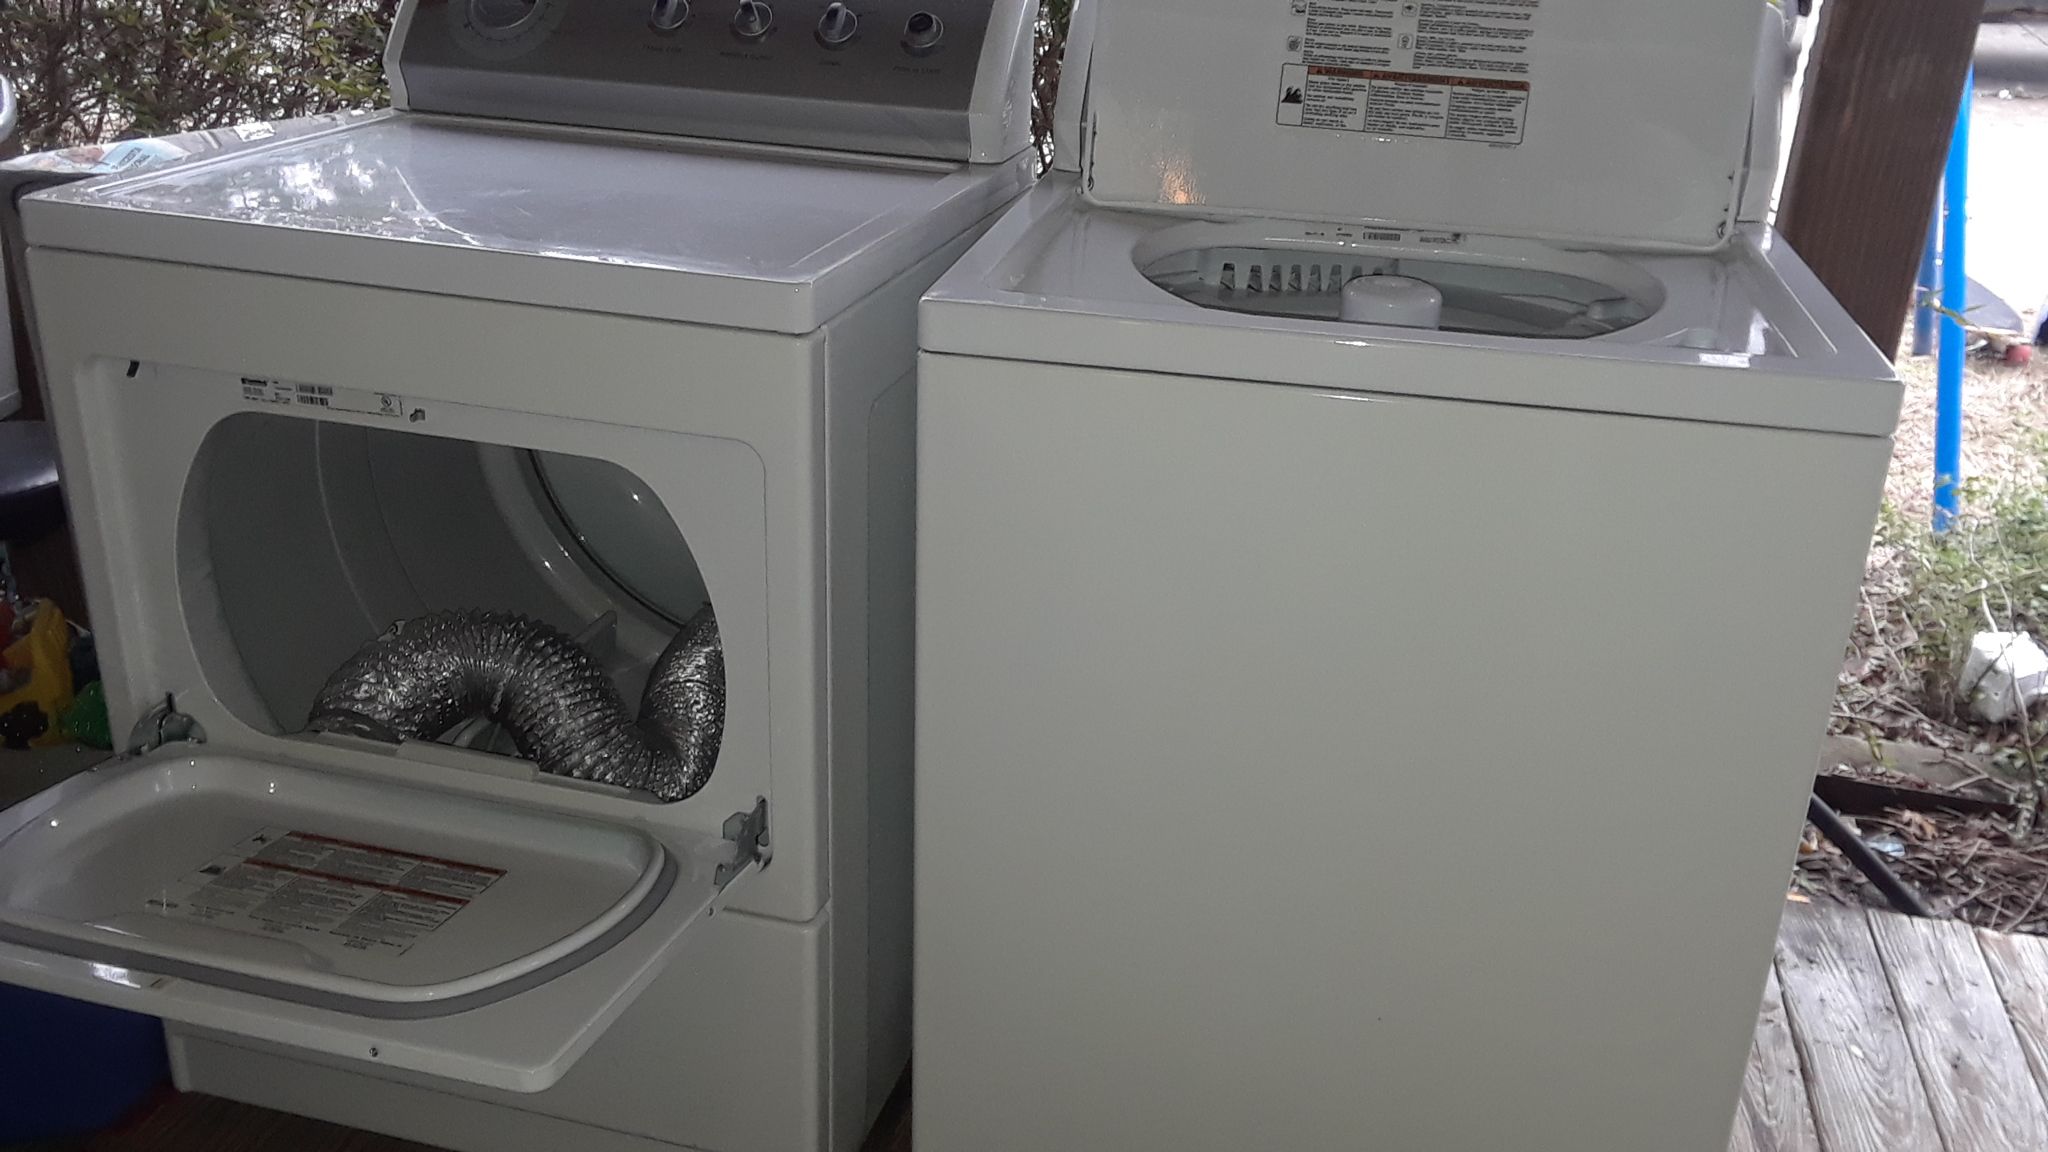 KENMORE 800 SERIES WASHER AND DRYER